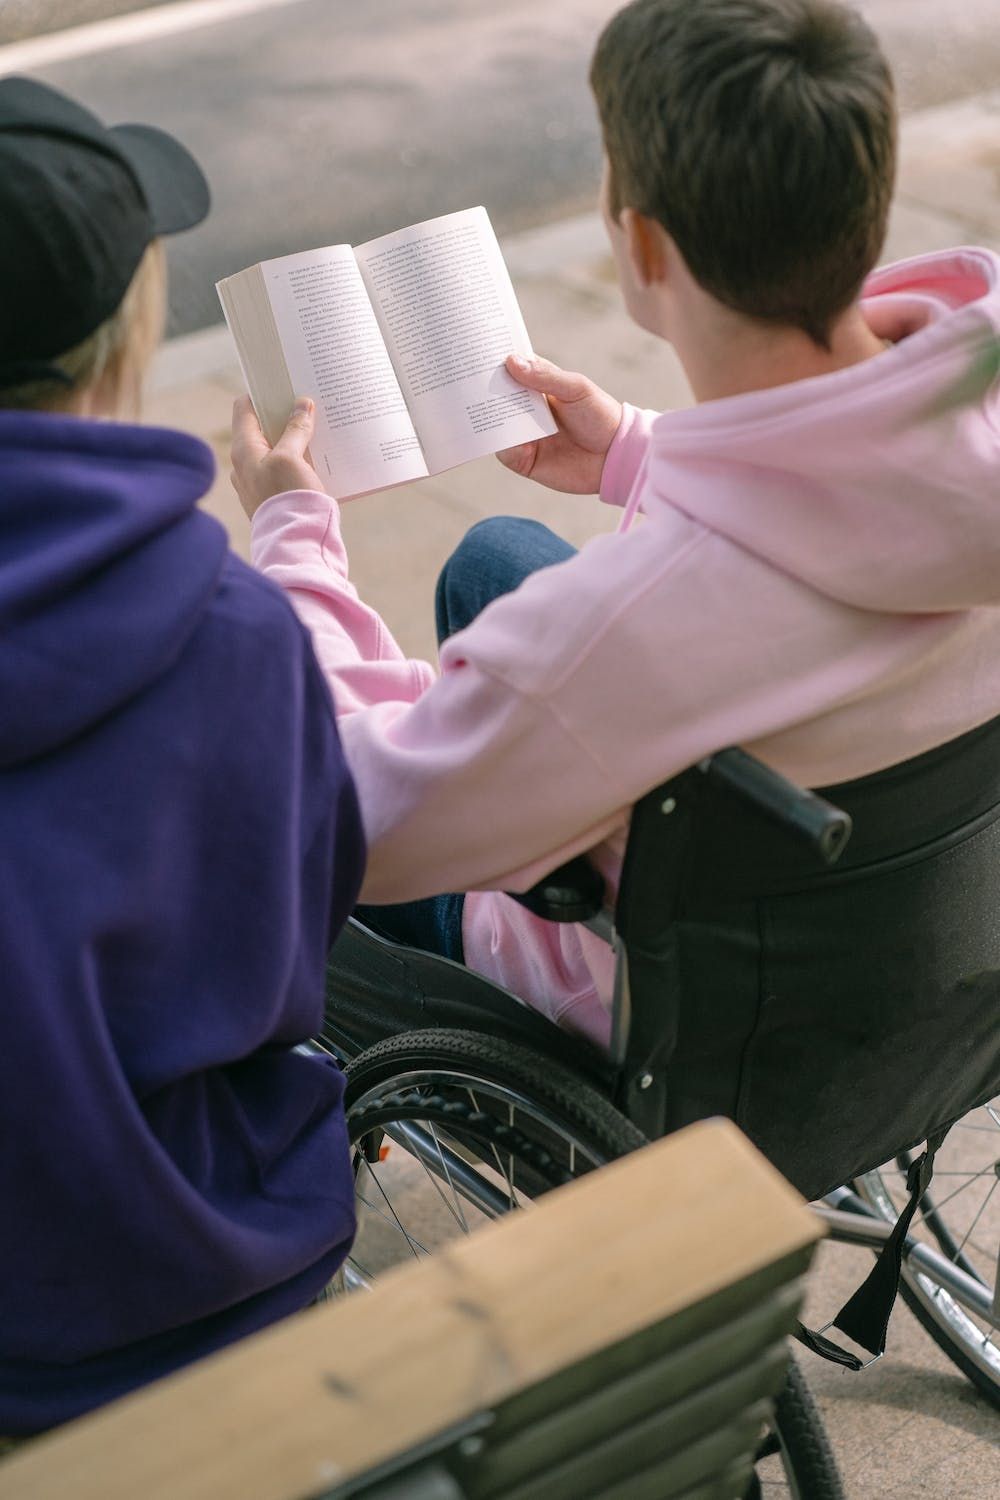 Seen from behind, a white person in a wheelchair, with short brown hair and a pink hoodie, is holding a book and appears to be reading aloud to another white person with blond hair, a black baseball cap and a dark blue hoodie